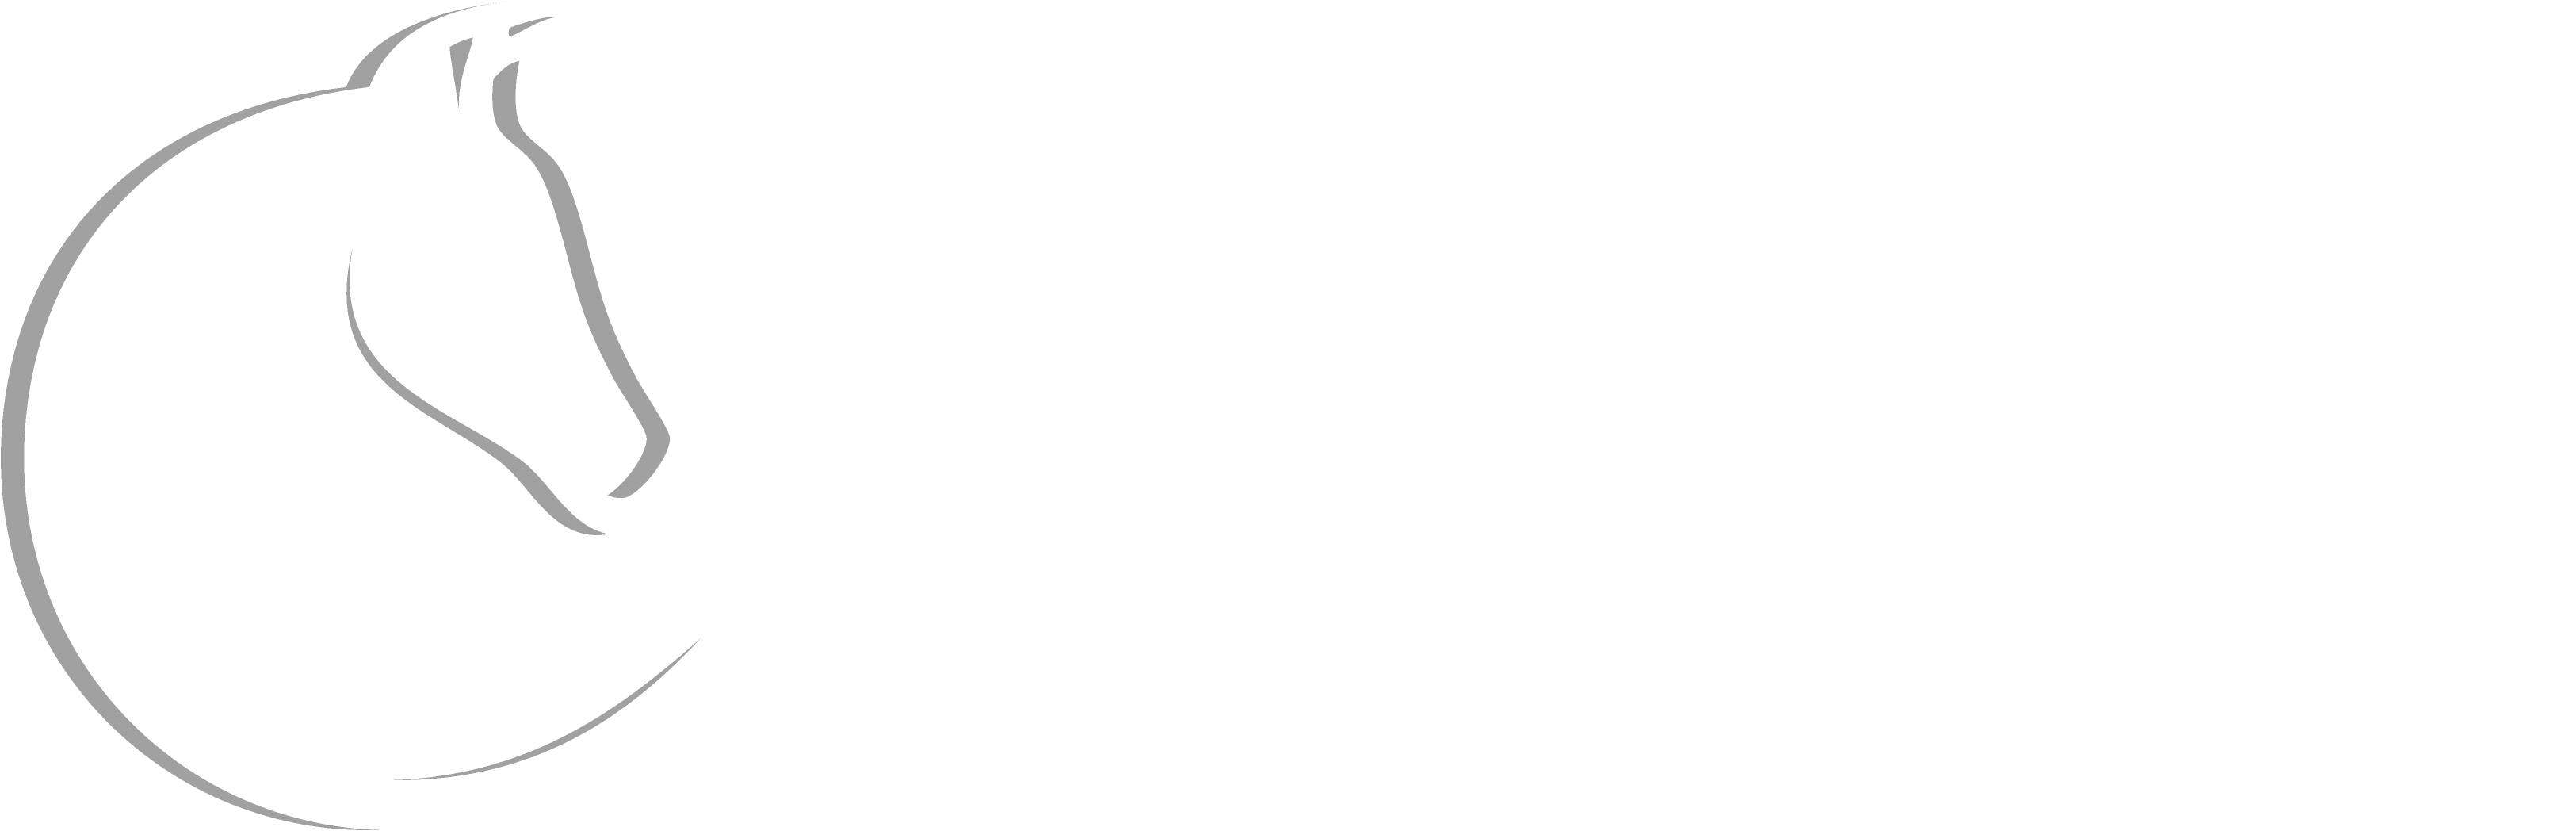 Chasque Email